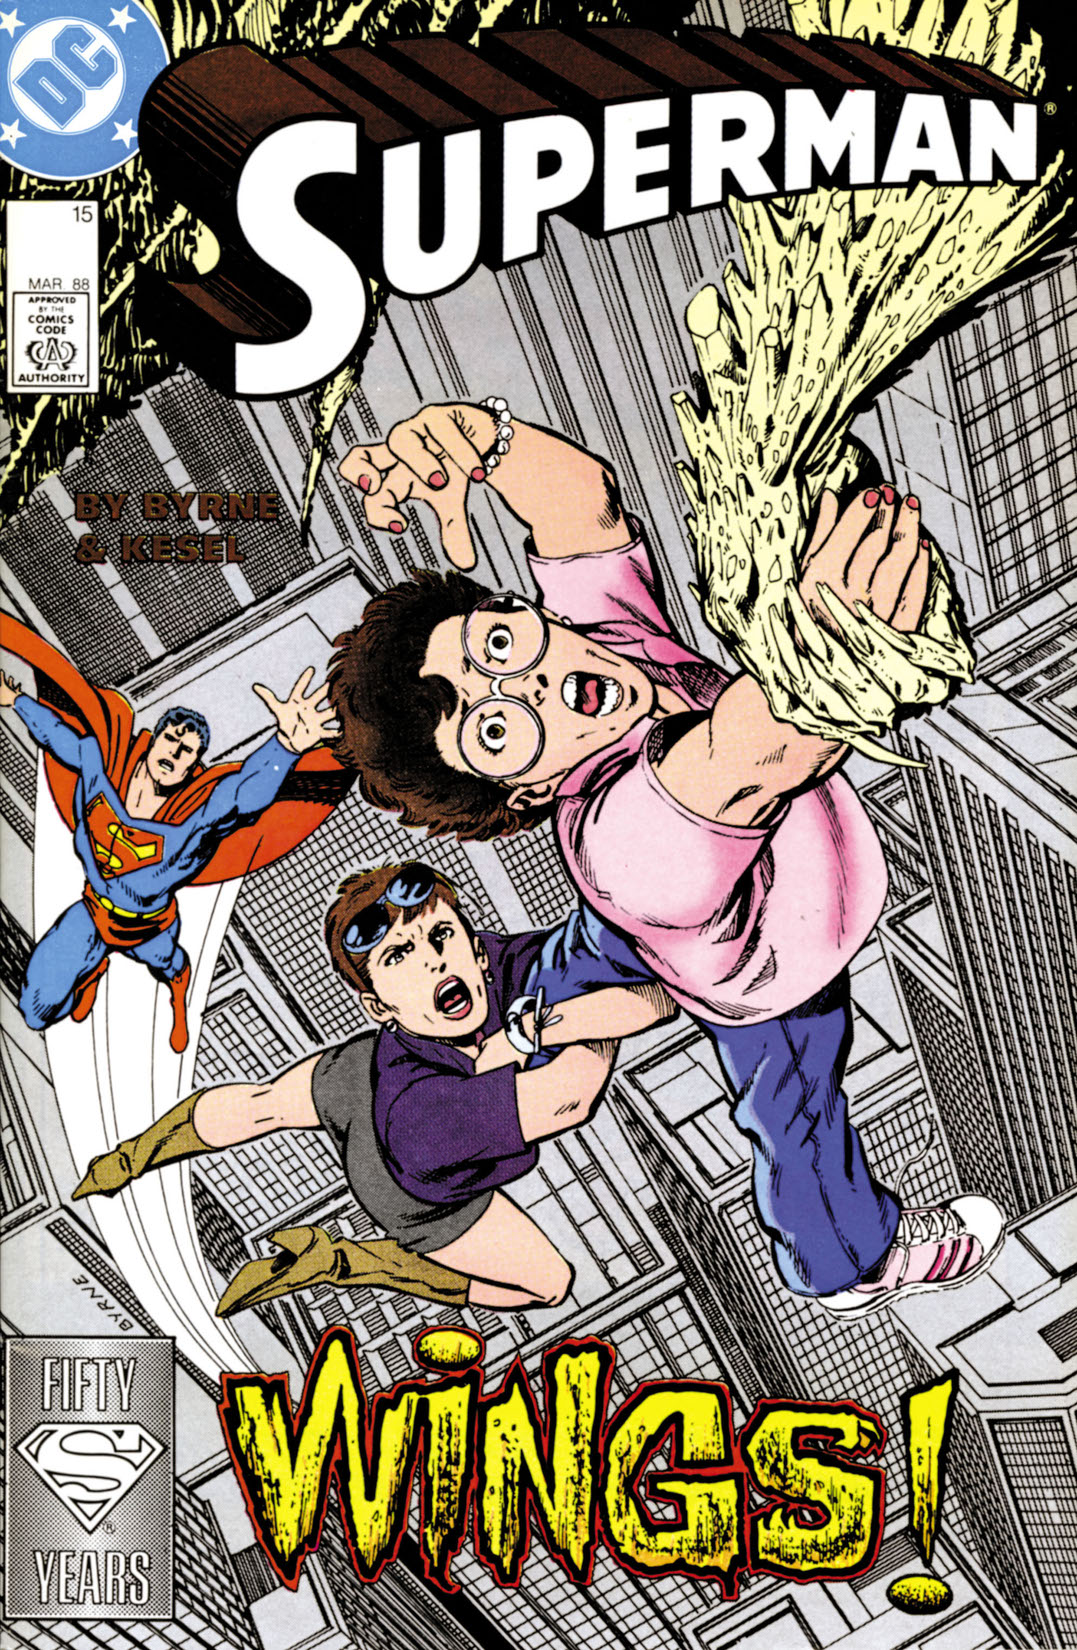 Superman (1986-) #15 preview images